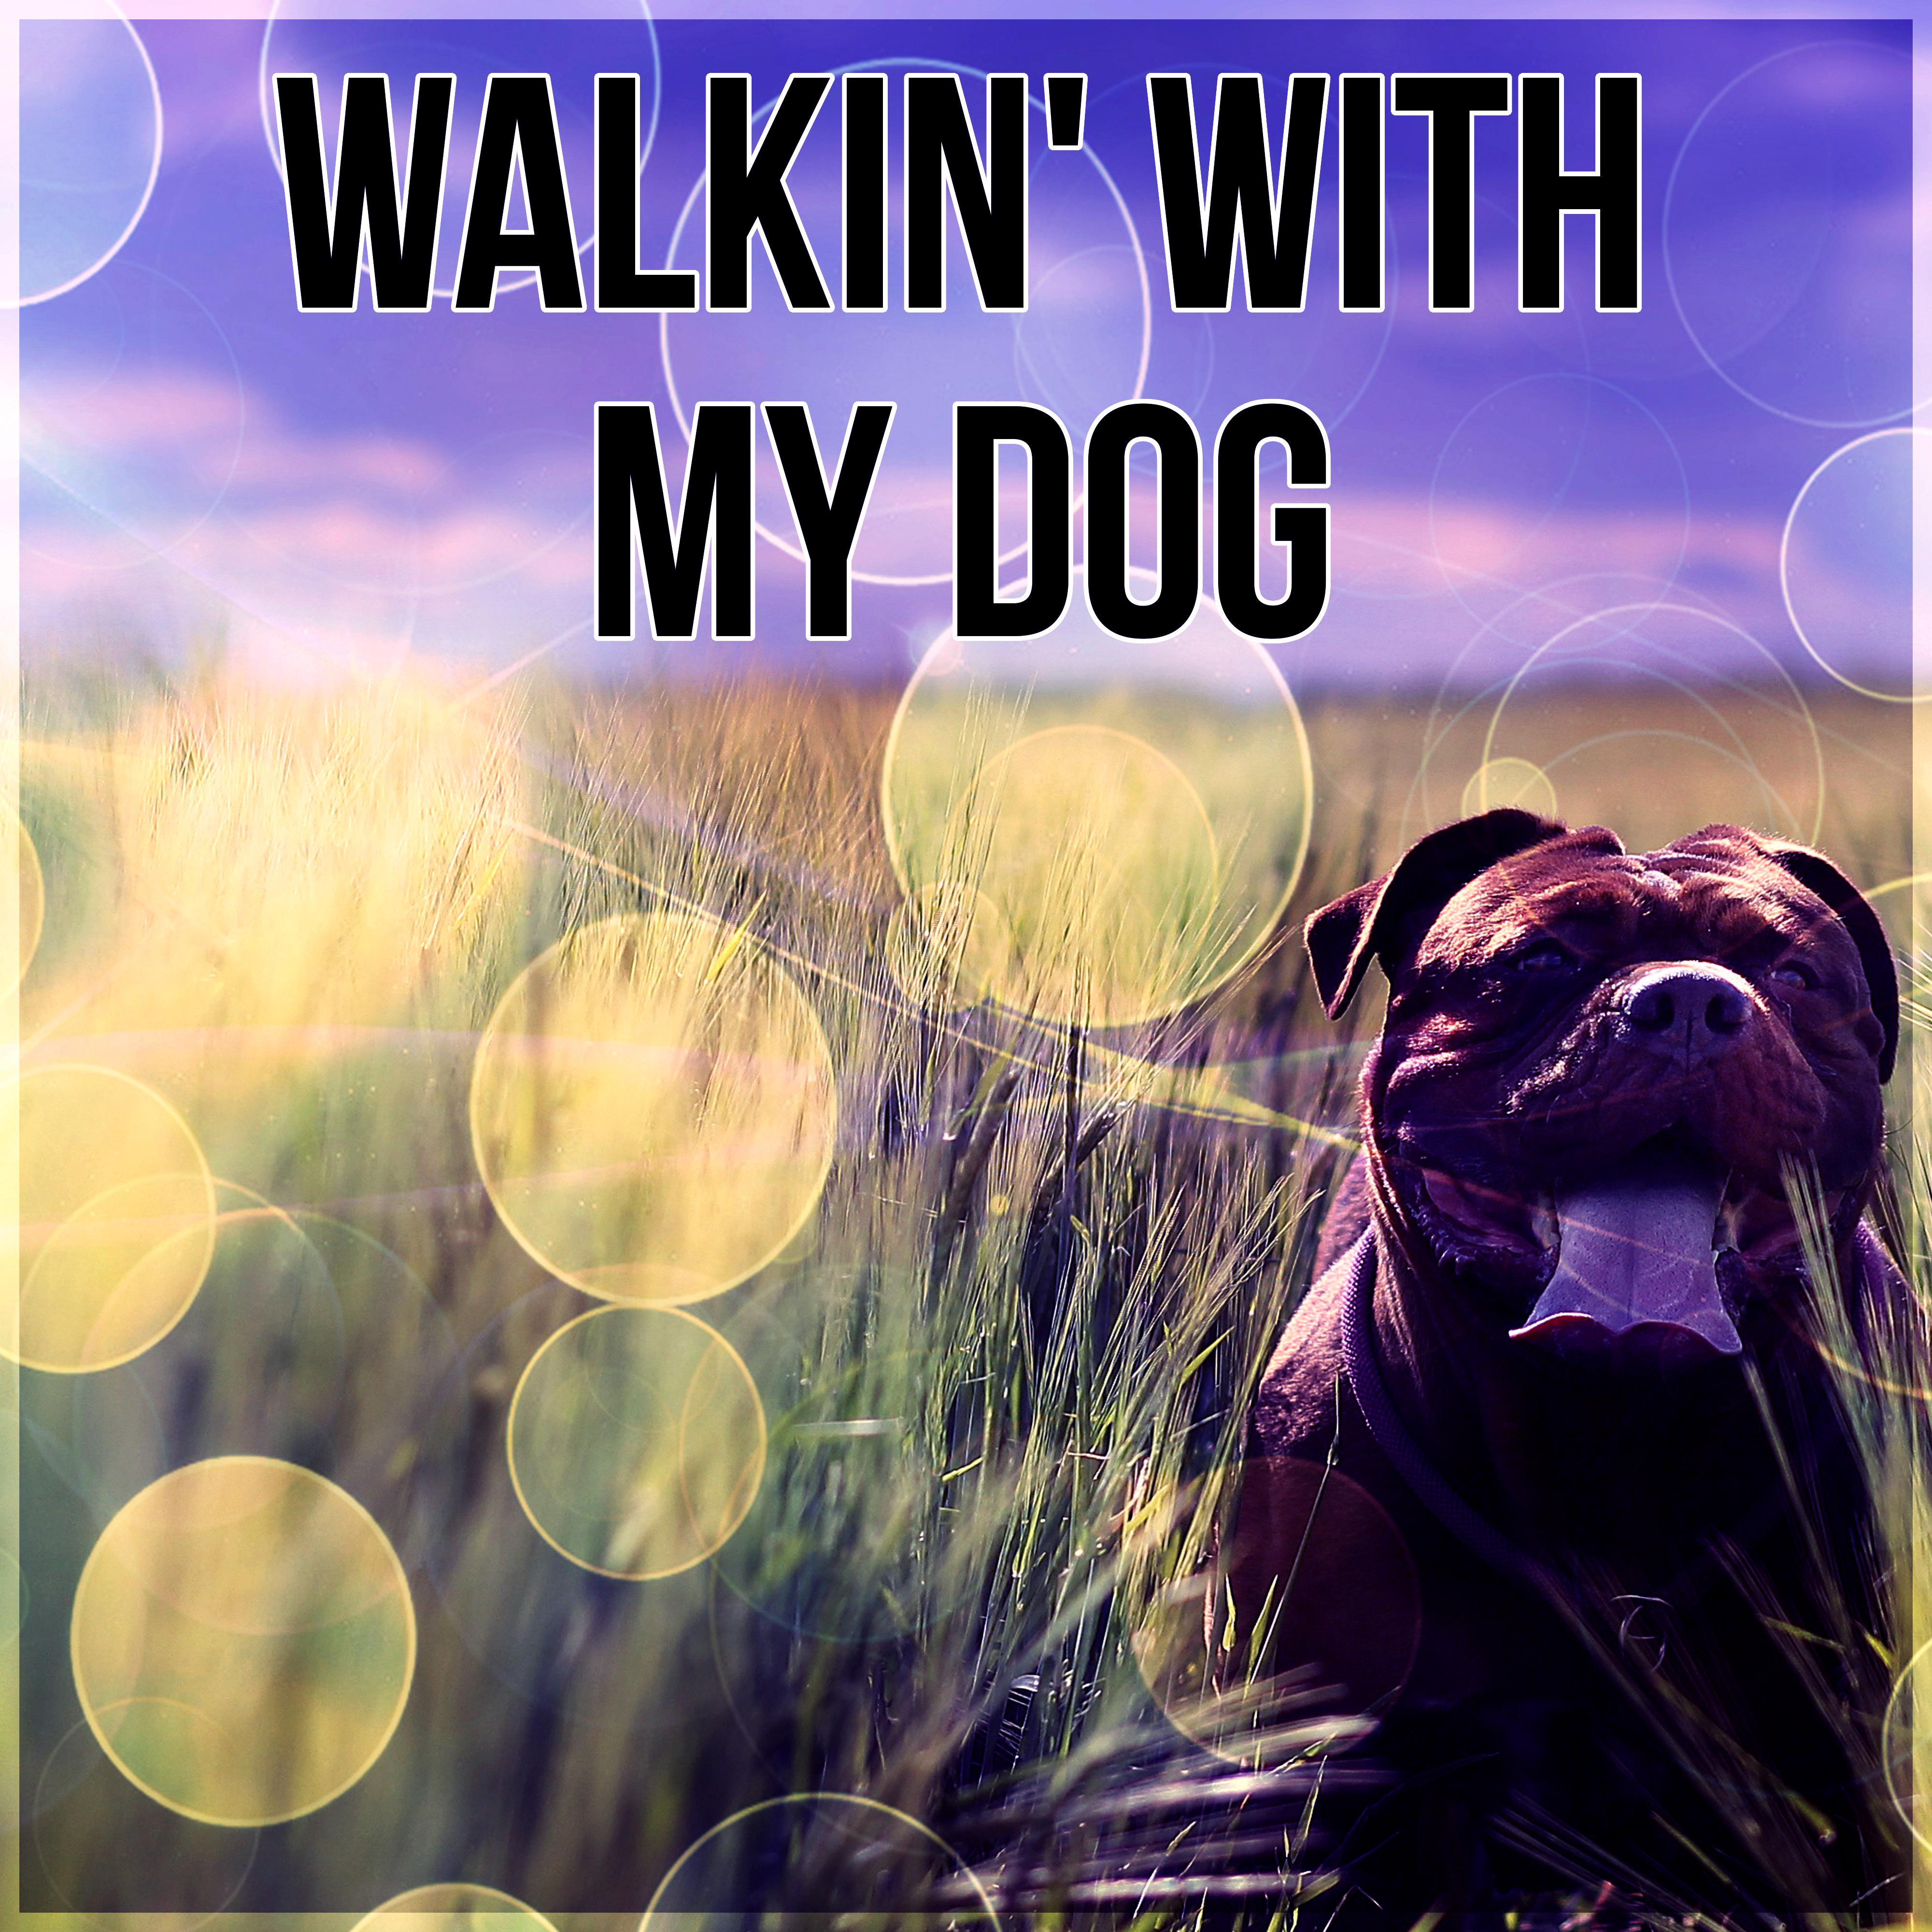 Walkin' with My Dog  Calming Music to Relax and Calm Down Your Dog, Pet Relaxation, Stress Relief, Anxiety Medication, Sleep Aids, Music Therapy for Dogs, Comfort and Happiness with Nature Sounds